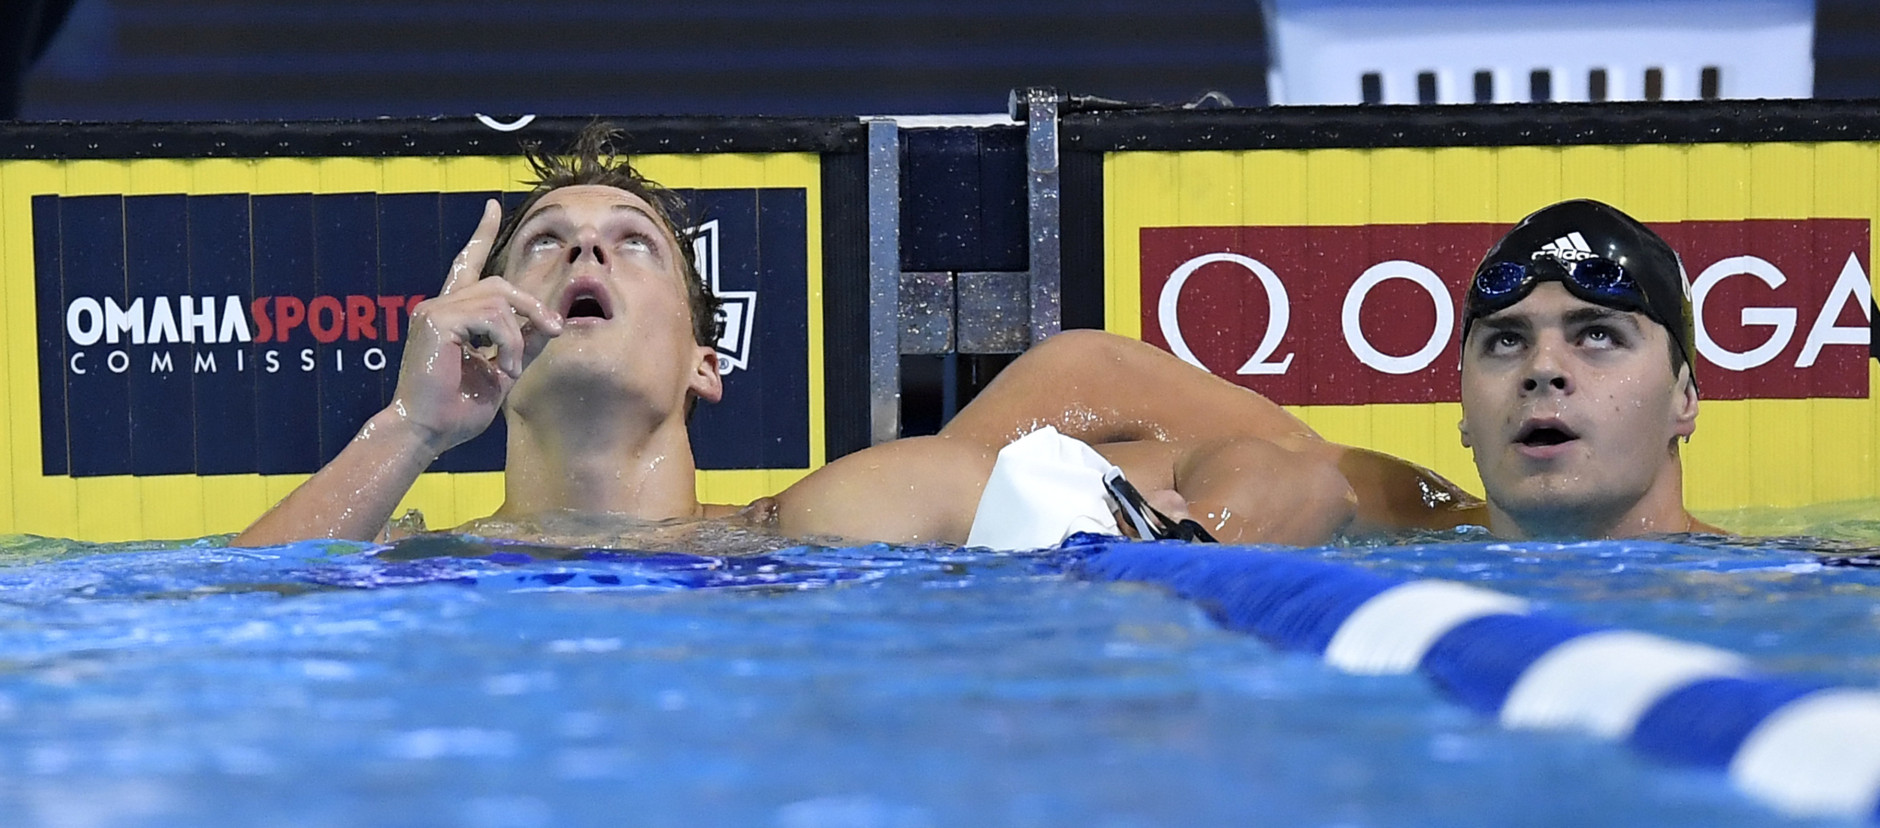 Jack Conger, left, and Matthew Josa, right, check their times after their heat in the men's 100-meter butterfly preliminaries at the U.S. Olympic swimming trials, Friday, July 1, 2016, in Omaha, Neb. (AP Photo/Mark J. Terrill)